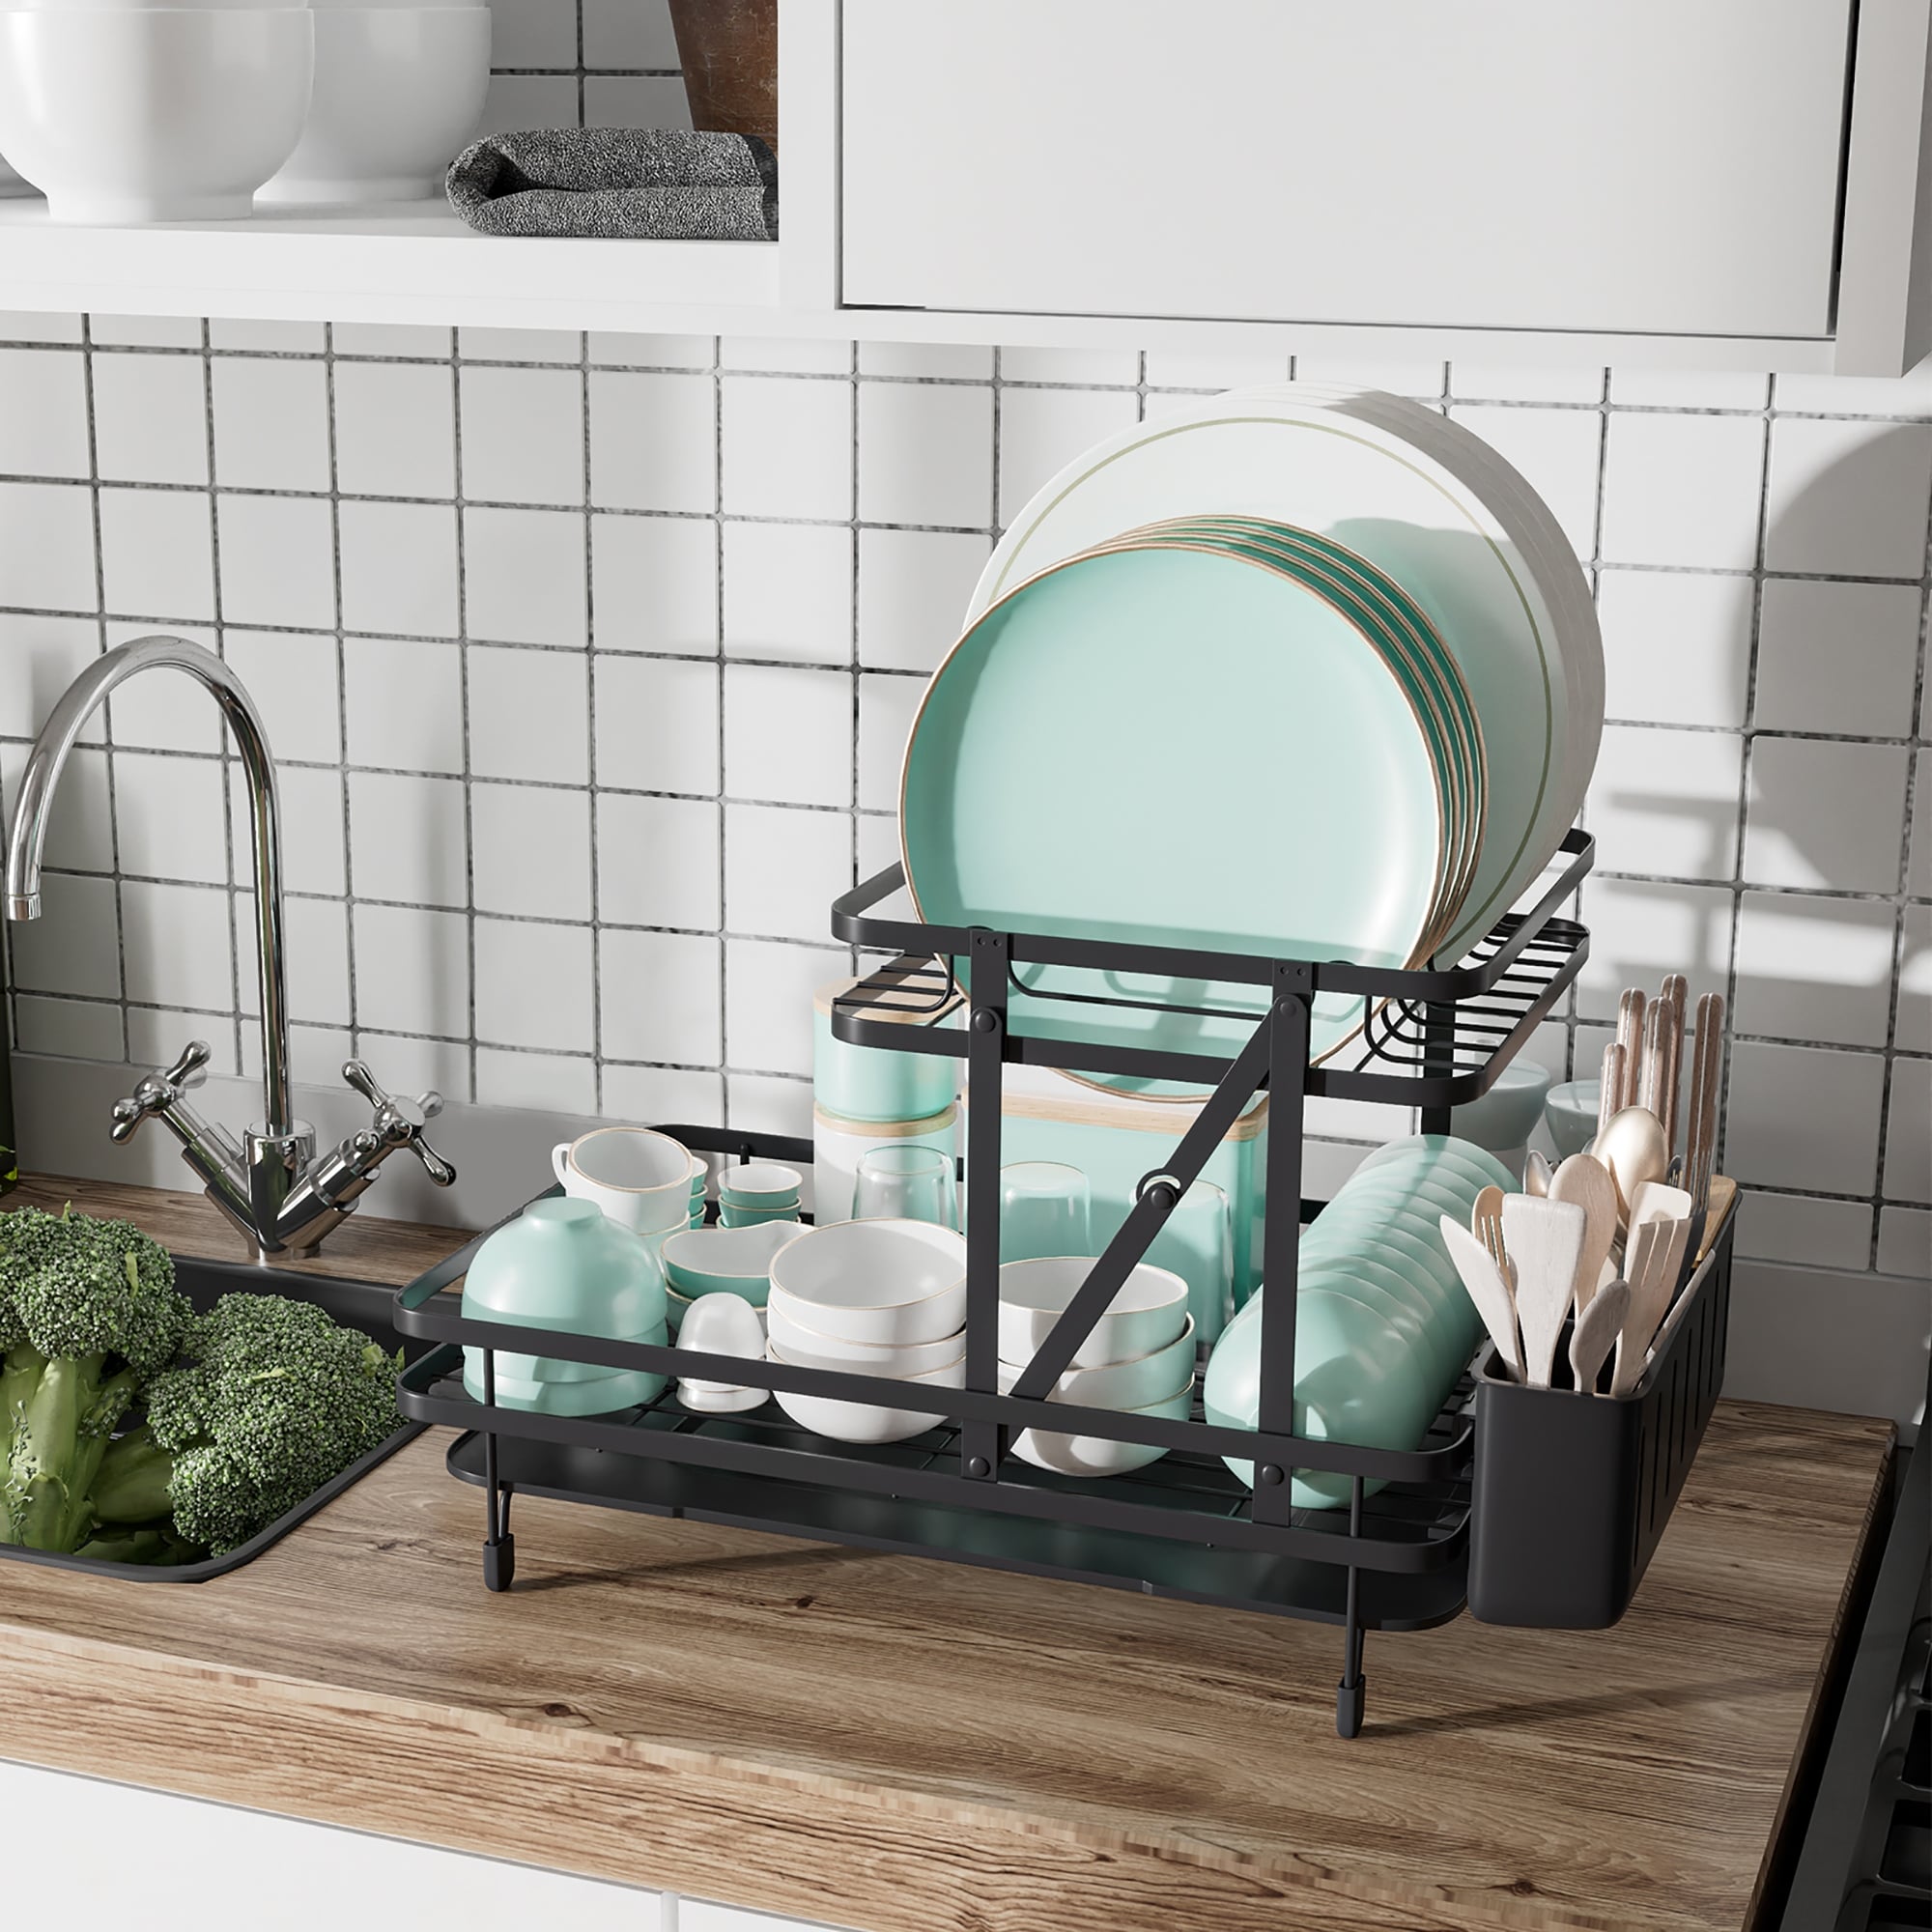 https://ak1.ostkcdn.com/images/products/is/images/direct/792c0ff64589753e1ddcec2bd79556be1f4fce43/Dish-Drying-Rack-Collapsible-2-Tier-Dish-Rack-and-Drainboard-Set.jpg